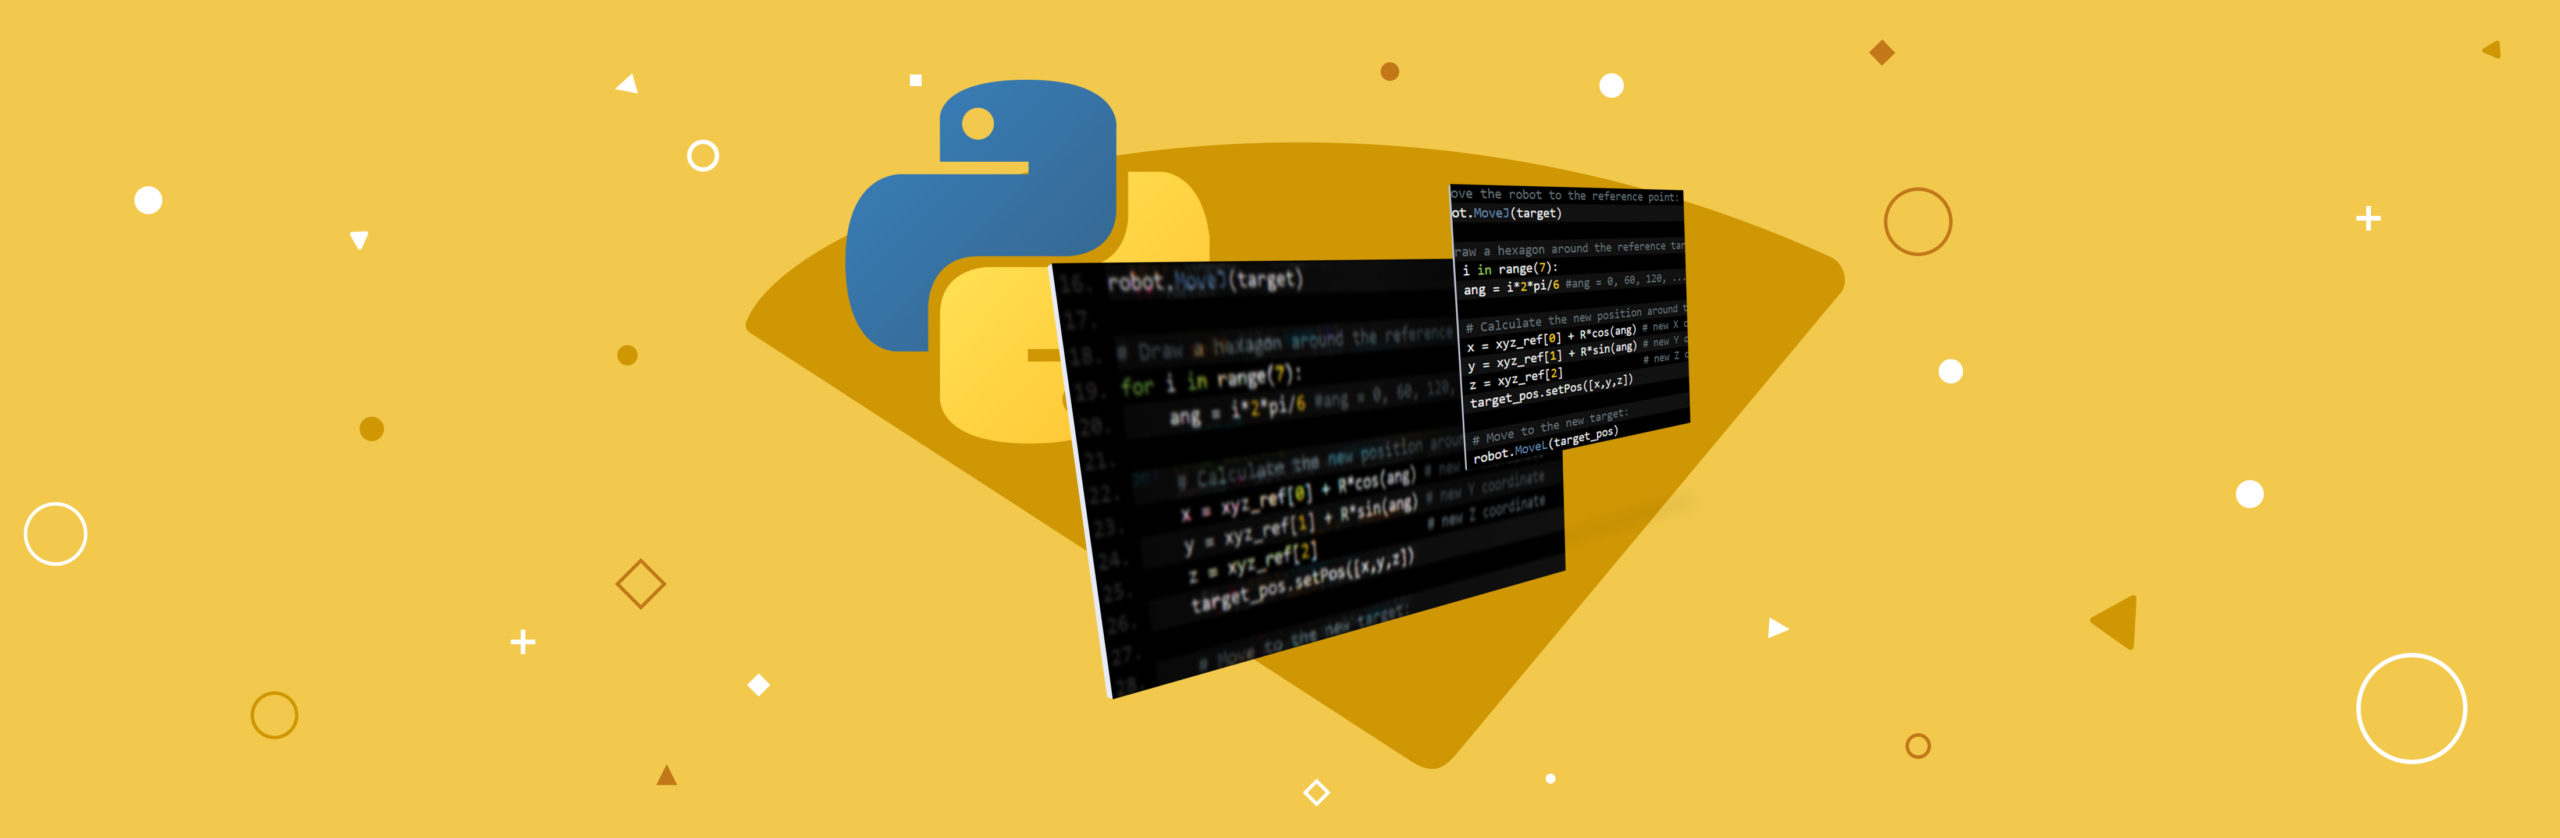 does visual studio for mac support python